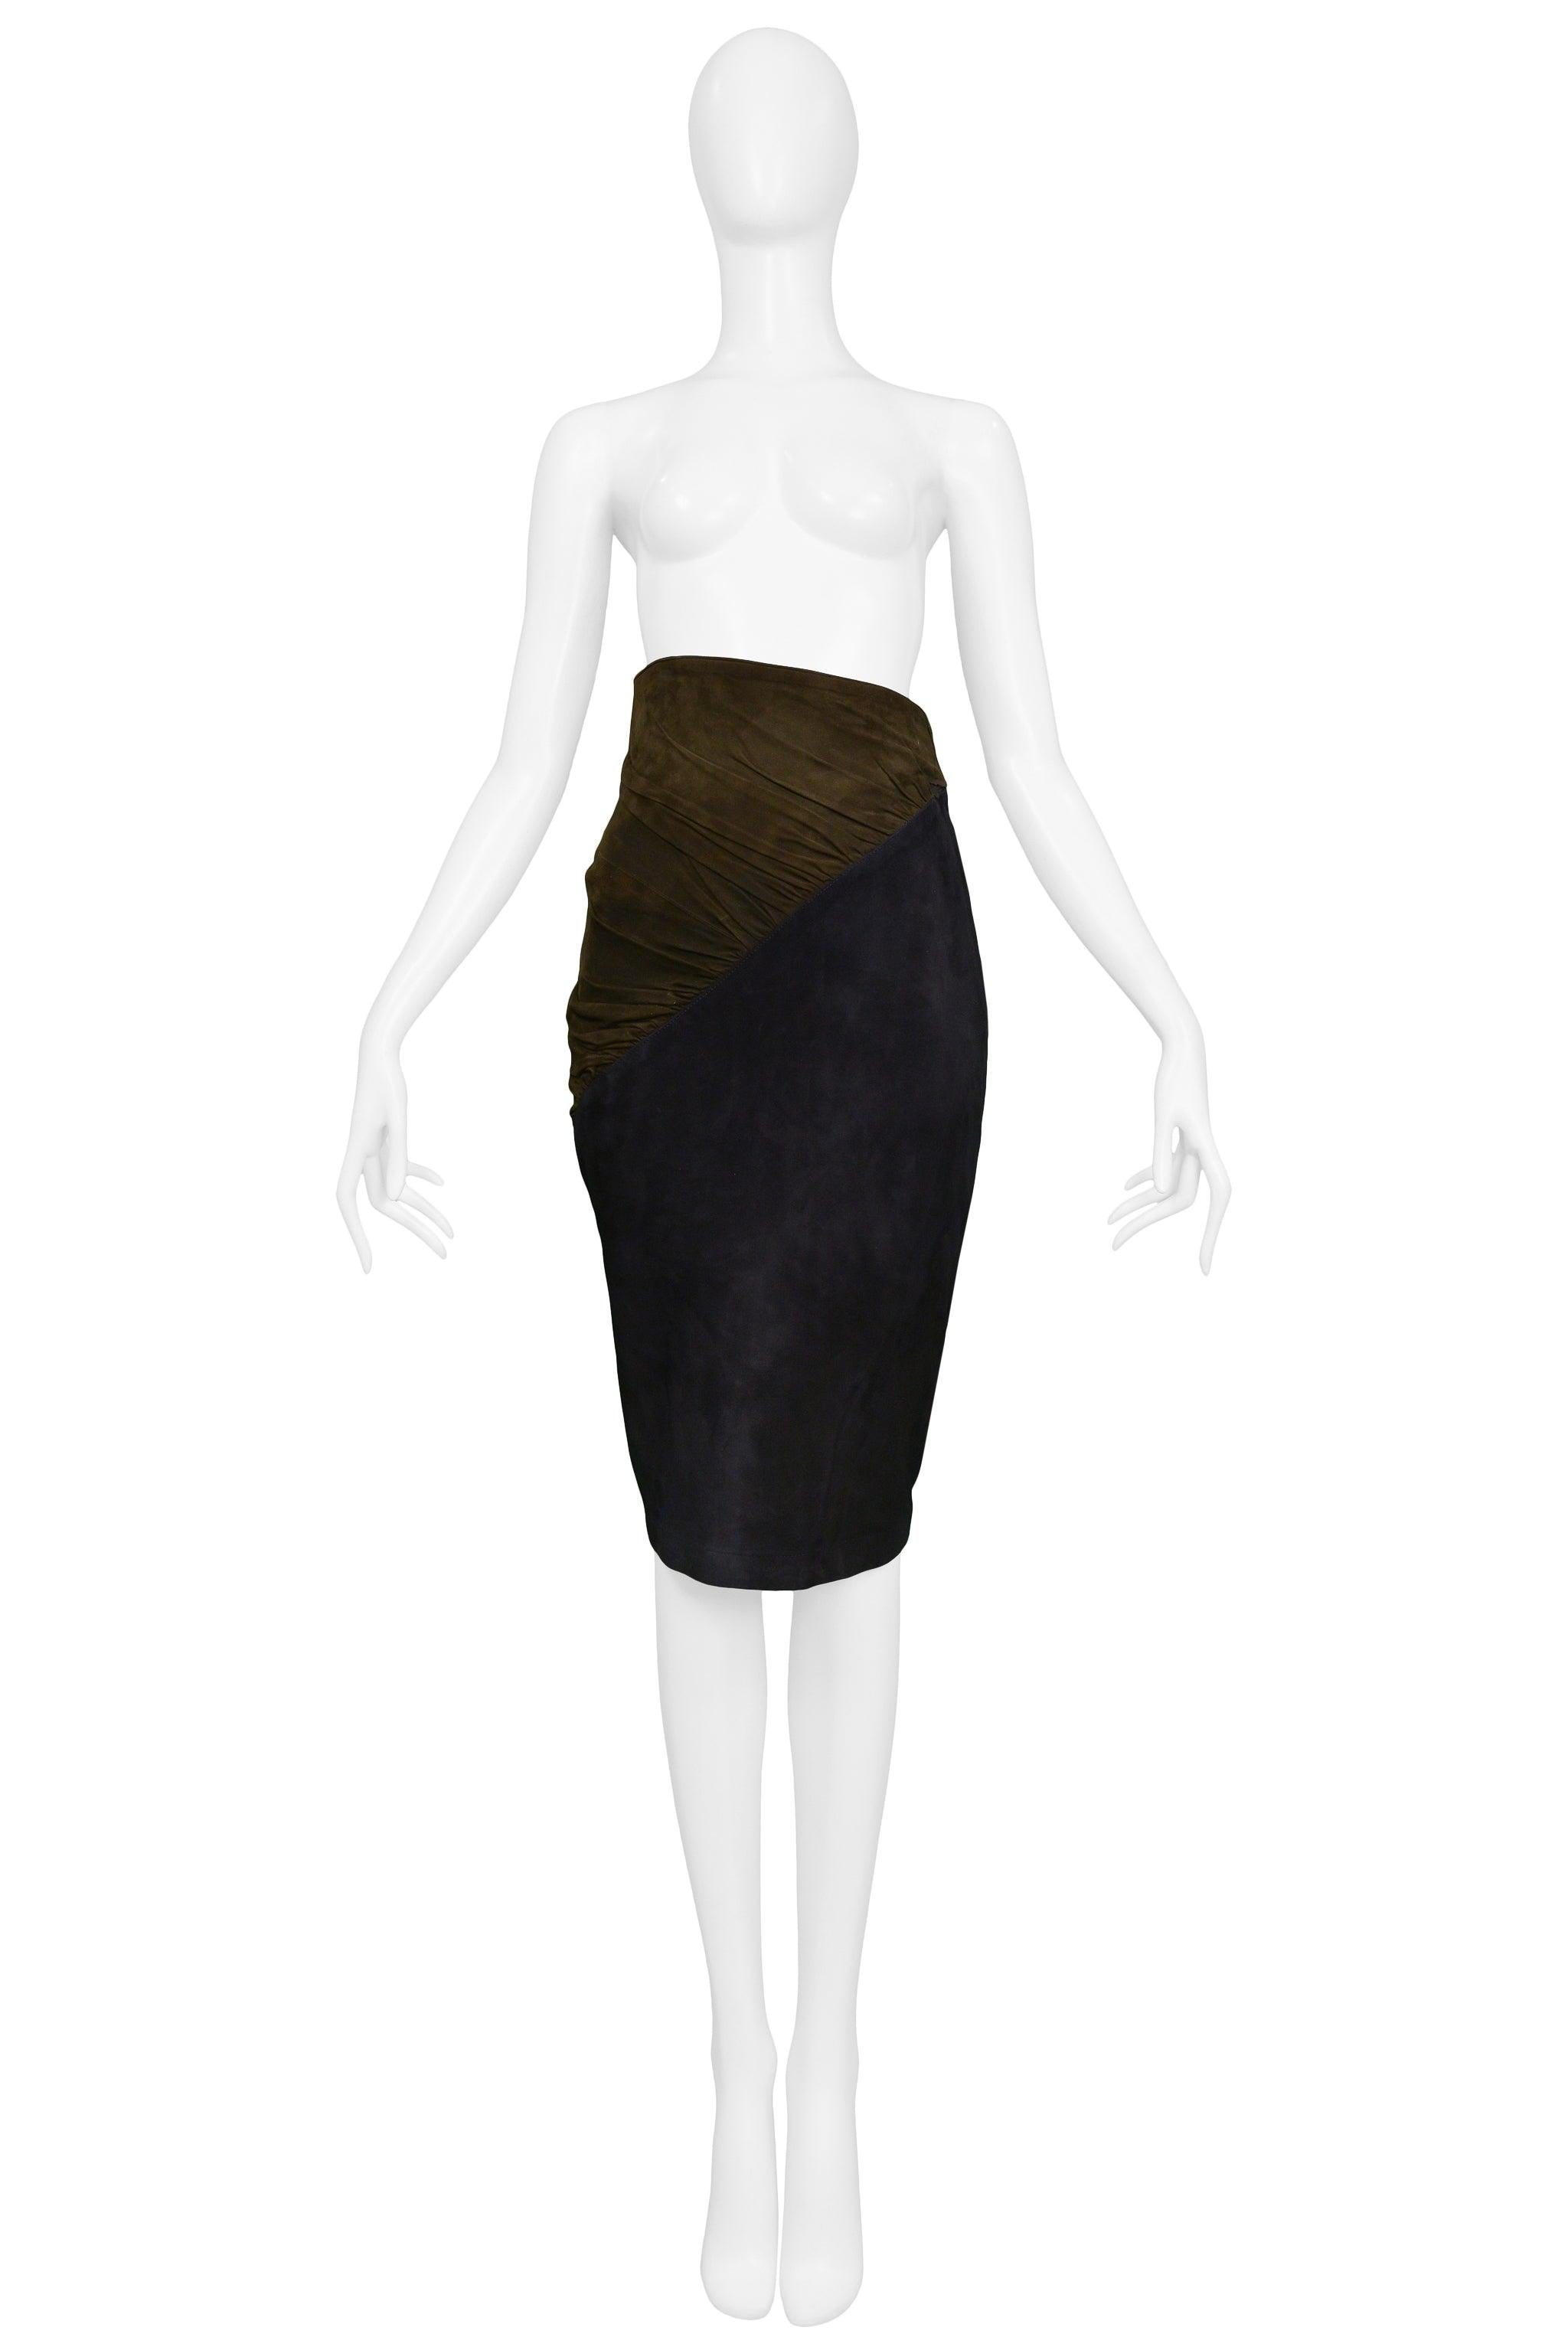 Resurrection Vintage is excited to offer a vintage Azzedine Alaia navy and brown suede skirt featuring a high-waist, a brown gathered asymmetrical panel that also functions as a belt with a ring buckle, slim pencil skirt body, hidden side zipper,